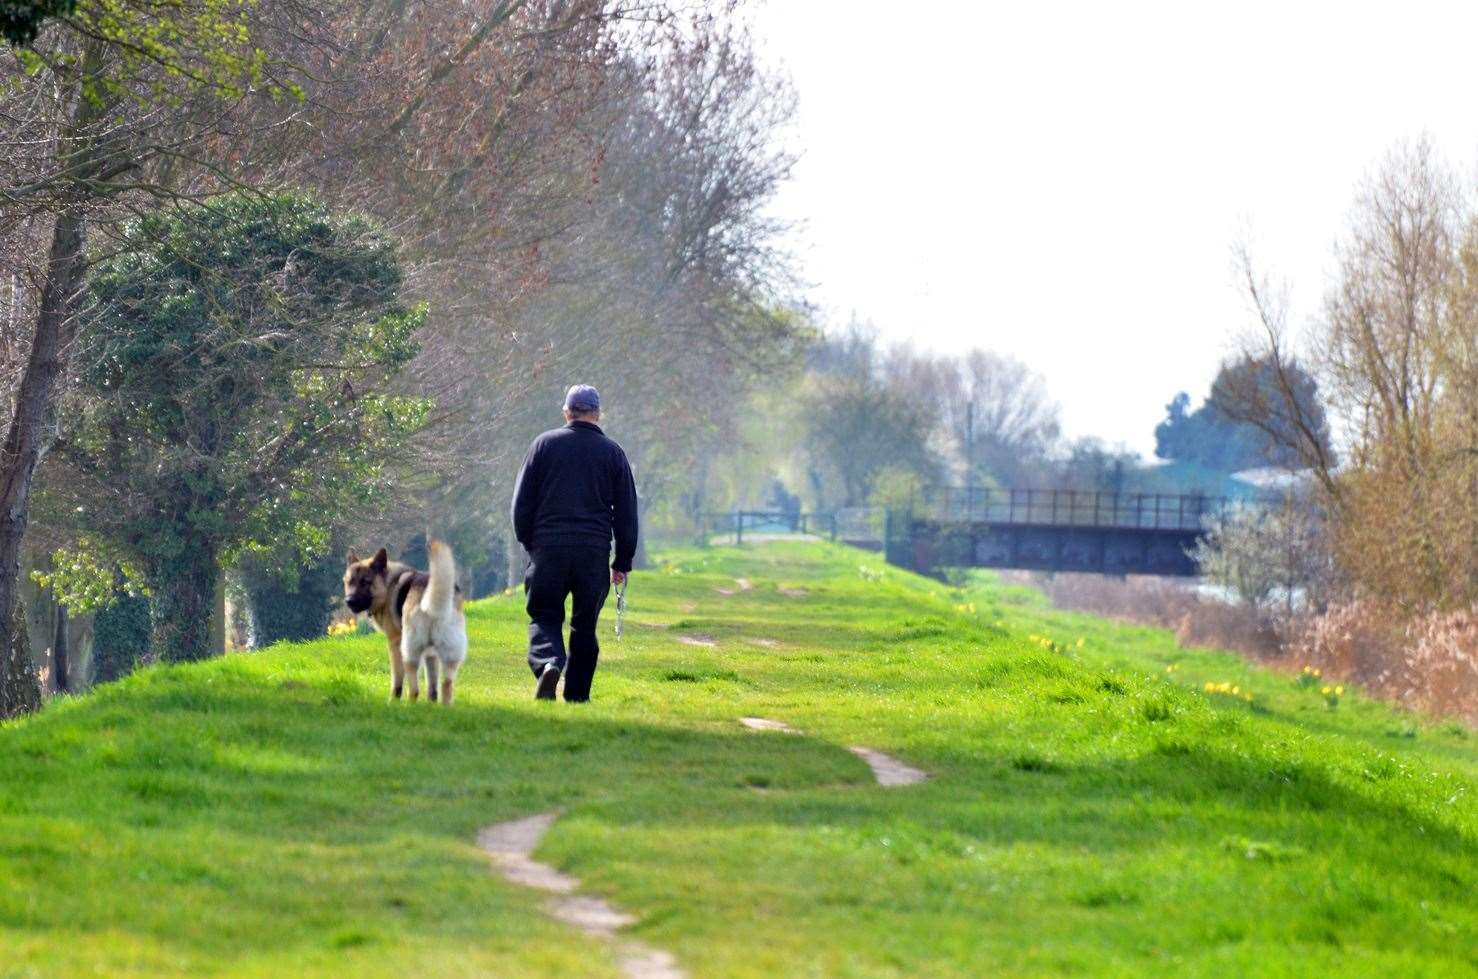 Dog walkers are advised to regularly change their walking routes